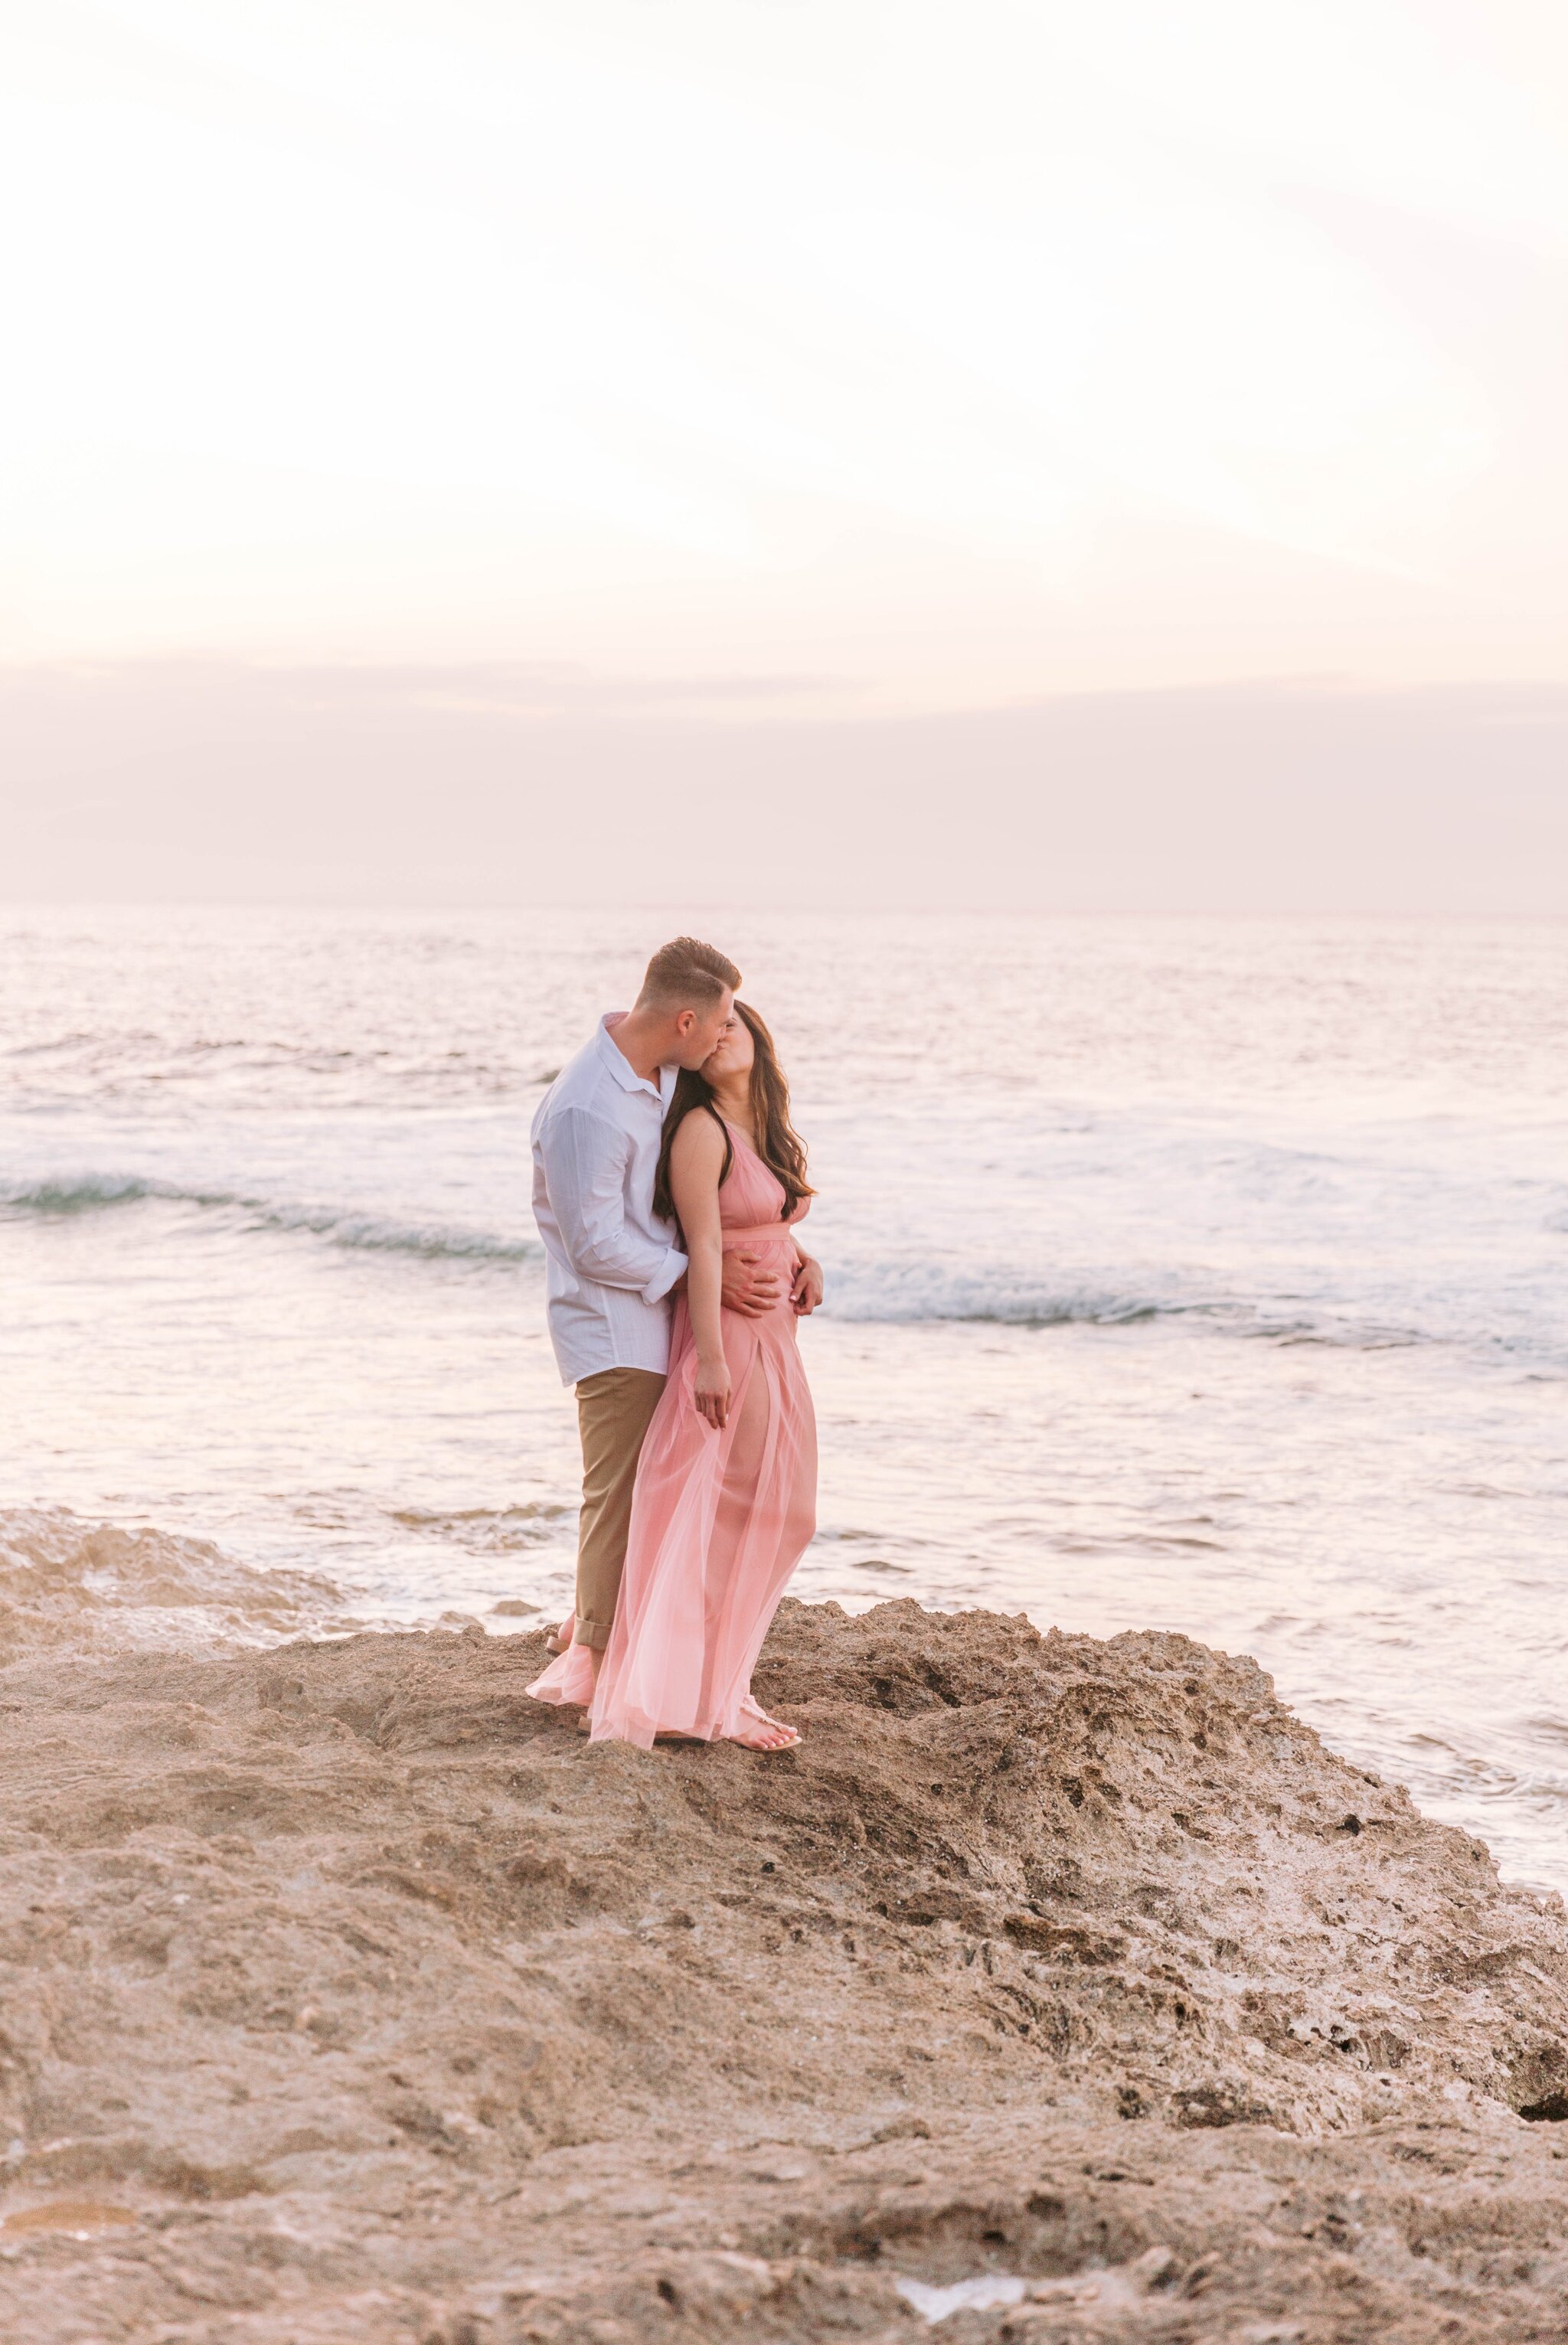 Romantic Beach Engagement Photography Session at Kaena Point - Oahu Hawaii Photographer